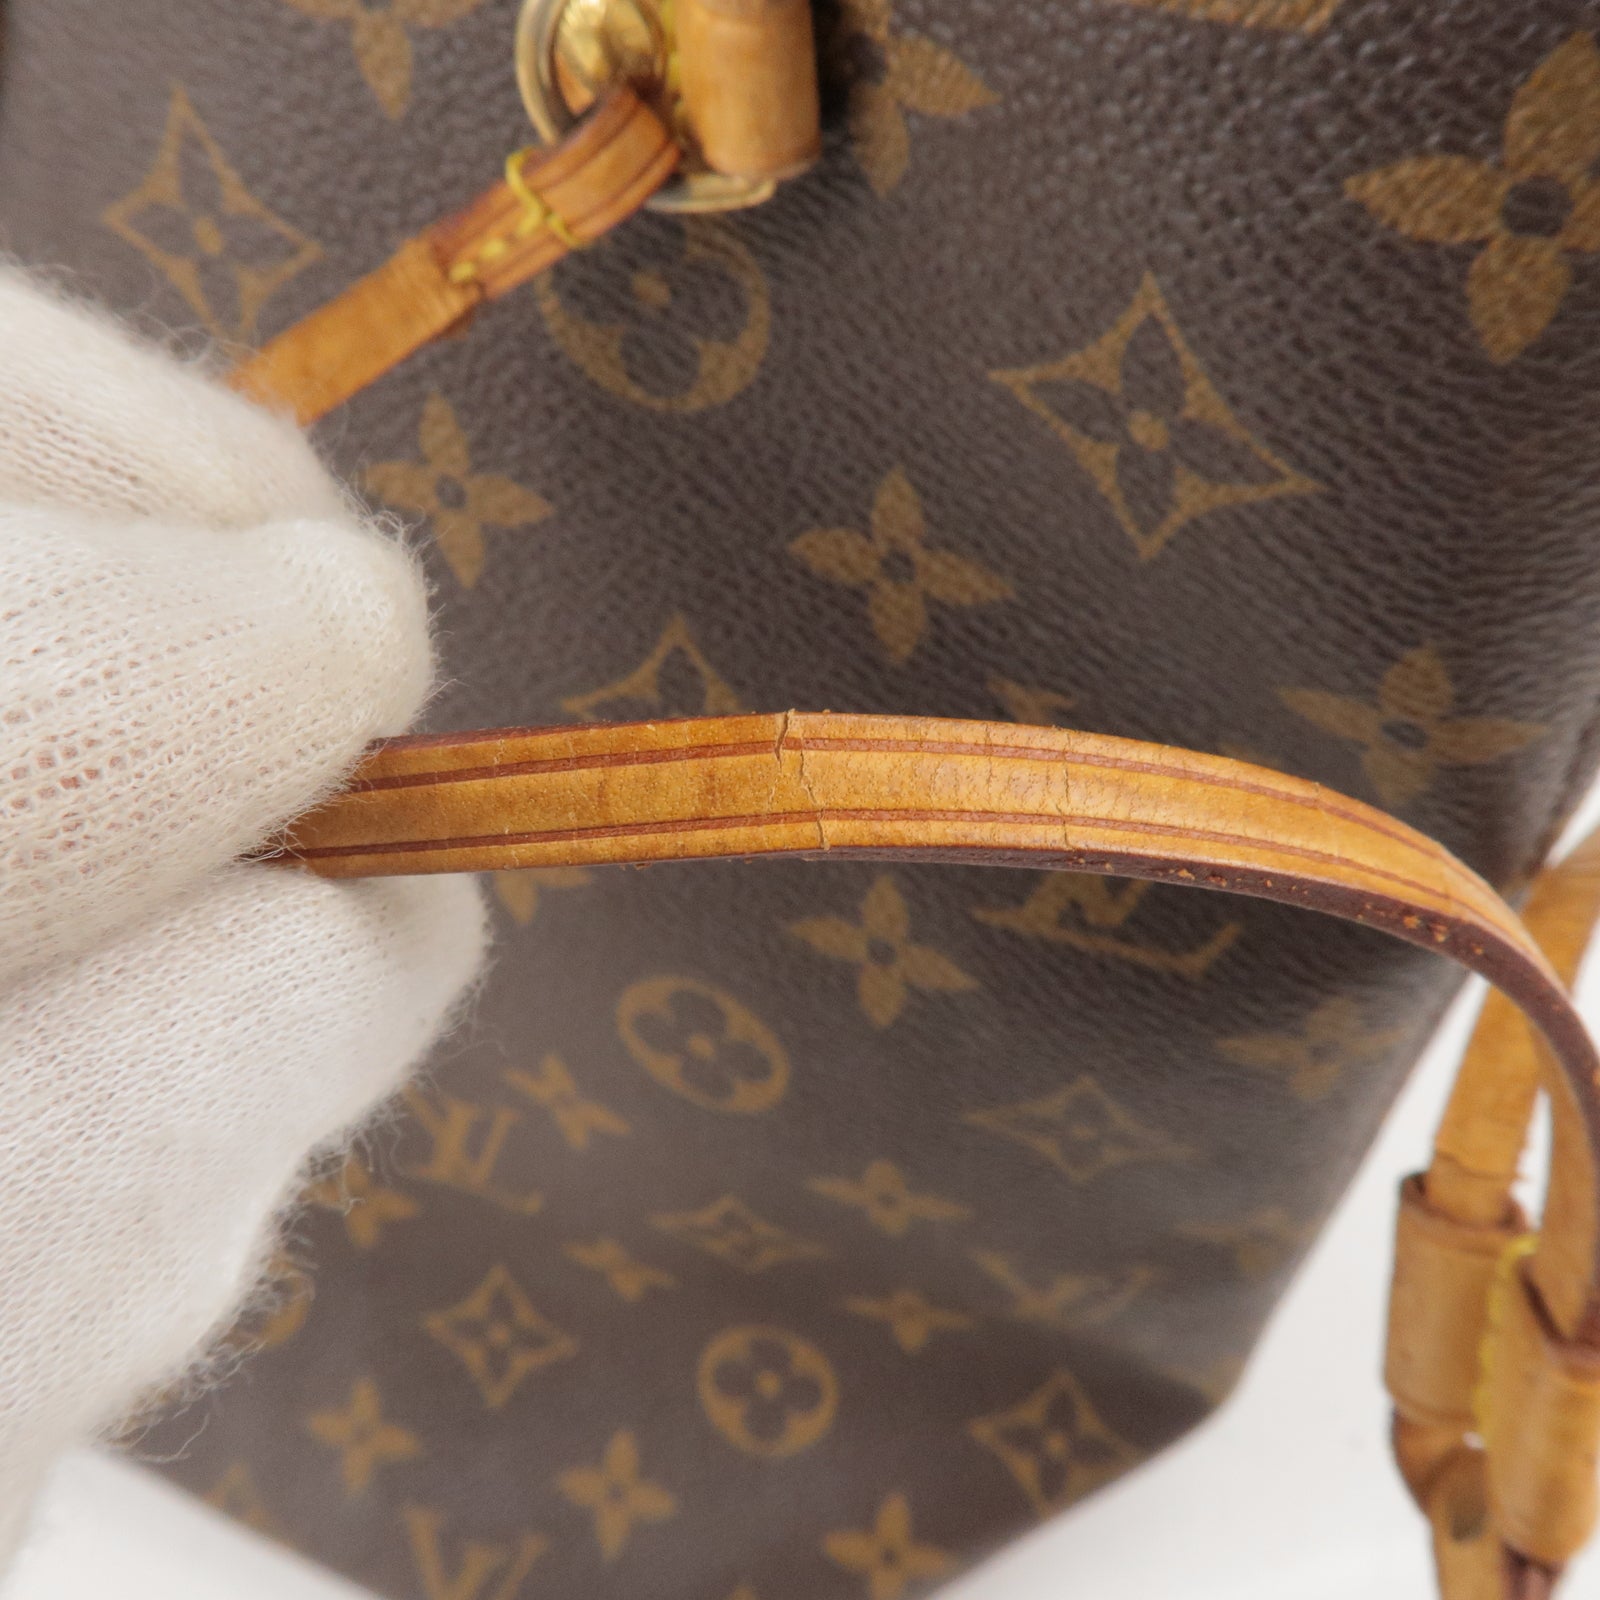 LOUIS VUITTON neverfull bag in brown monogram canvas and natural